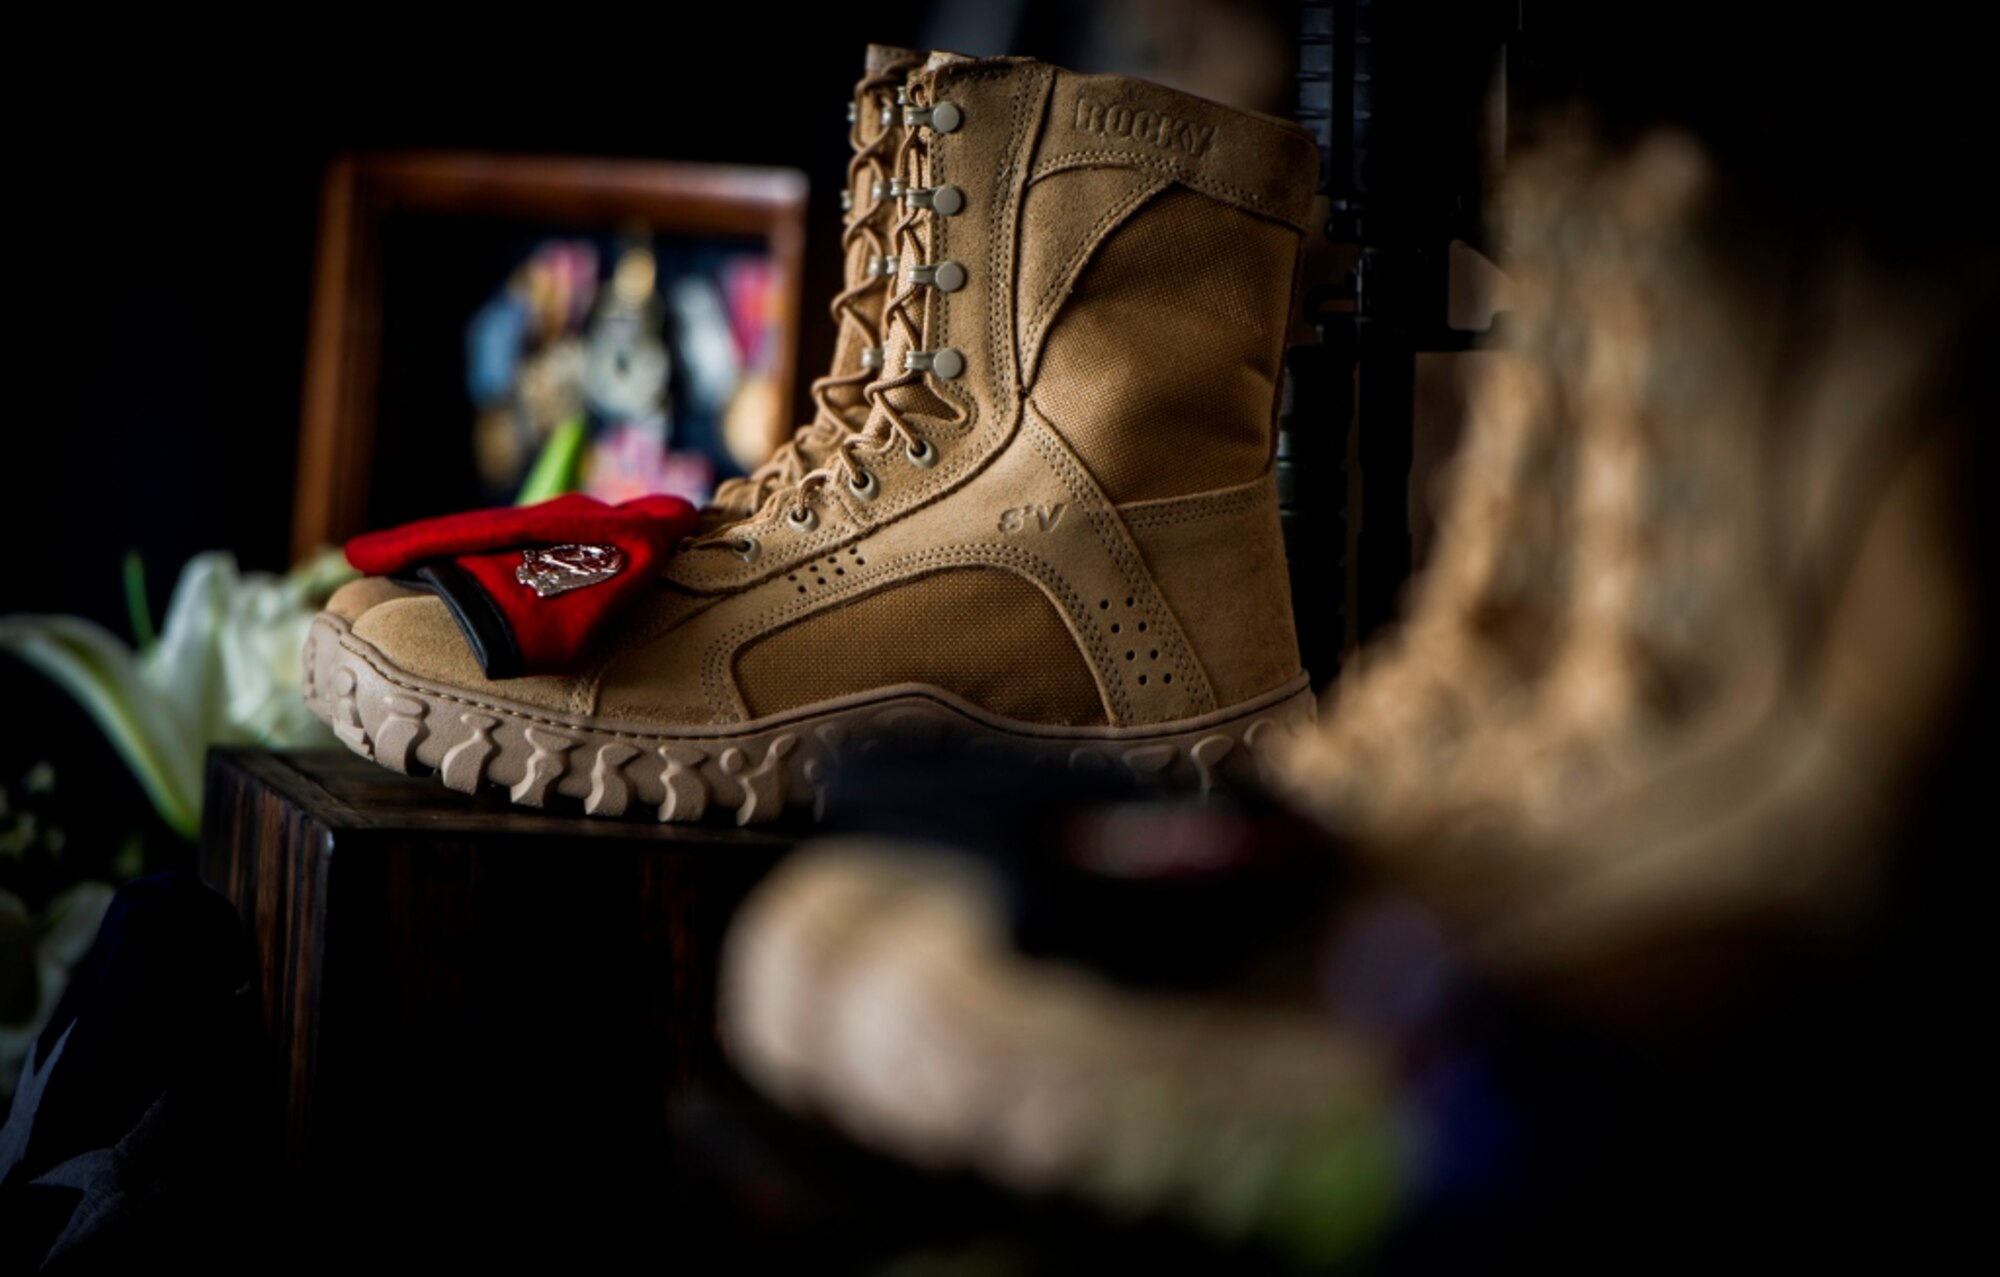 A traditional boots, helmet and weapon display stood as silent witnesses as more than 500 Airmen, friends and family members honored Tech. Sgt. Timothy Officer Jr., a tactical
air control party Airman, and Tech. Sgt. Marty Bettelyoun, a combat controller, at Hurlburt Field, Fla., Aug. 7, 2015. These men died from injuries sustained Aug. 3 in a freefall training accident on Eglin Range, Fla.  Both were assigned to the 24th Special Operations Wing, and they will be buried with full military honors. (U.S. Air Force photo by Senior Airman Christopher Callaway/Released)
